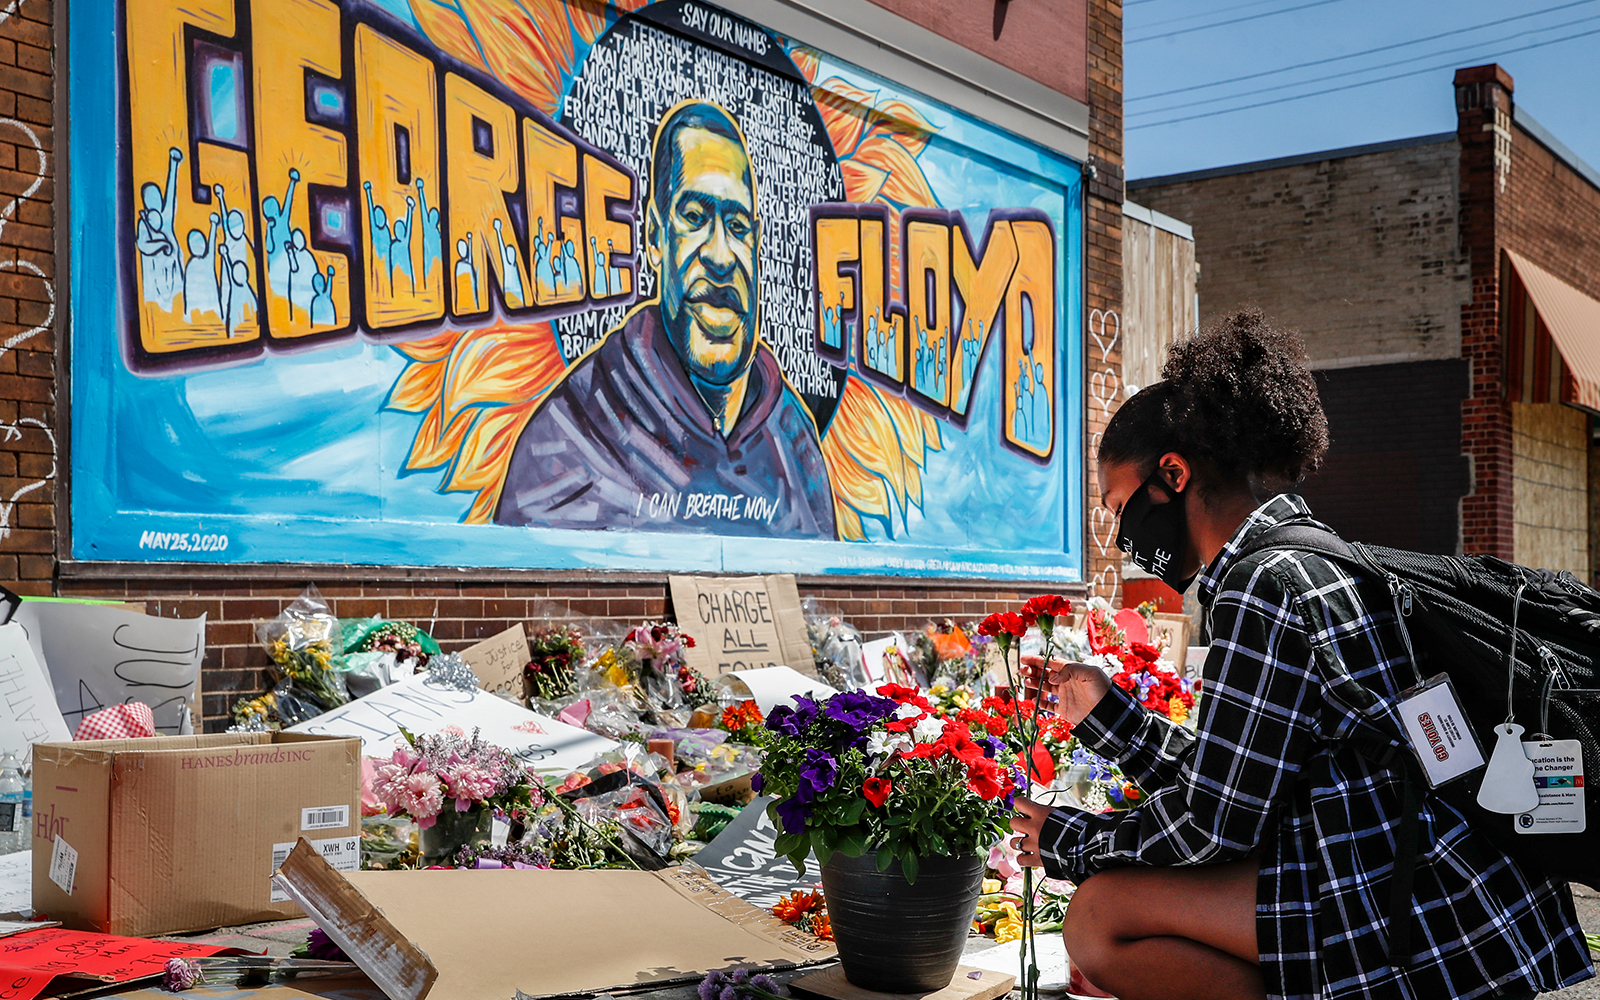 Malaysia Hammond, 19, places flowers at a memorial mural for George Floyd at the corner of Chicago Avenue and 38th Street, May 31, 2020, in Minneapolis. (AP/John Minchillo)